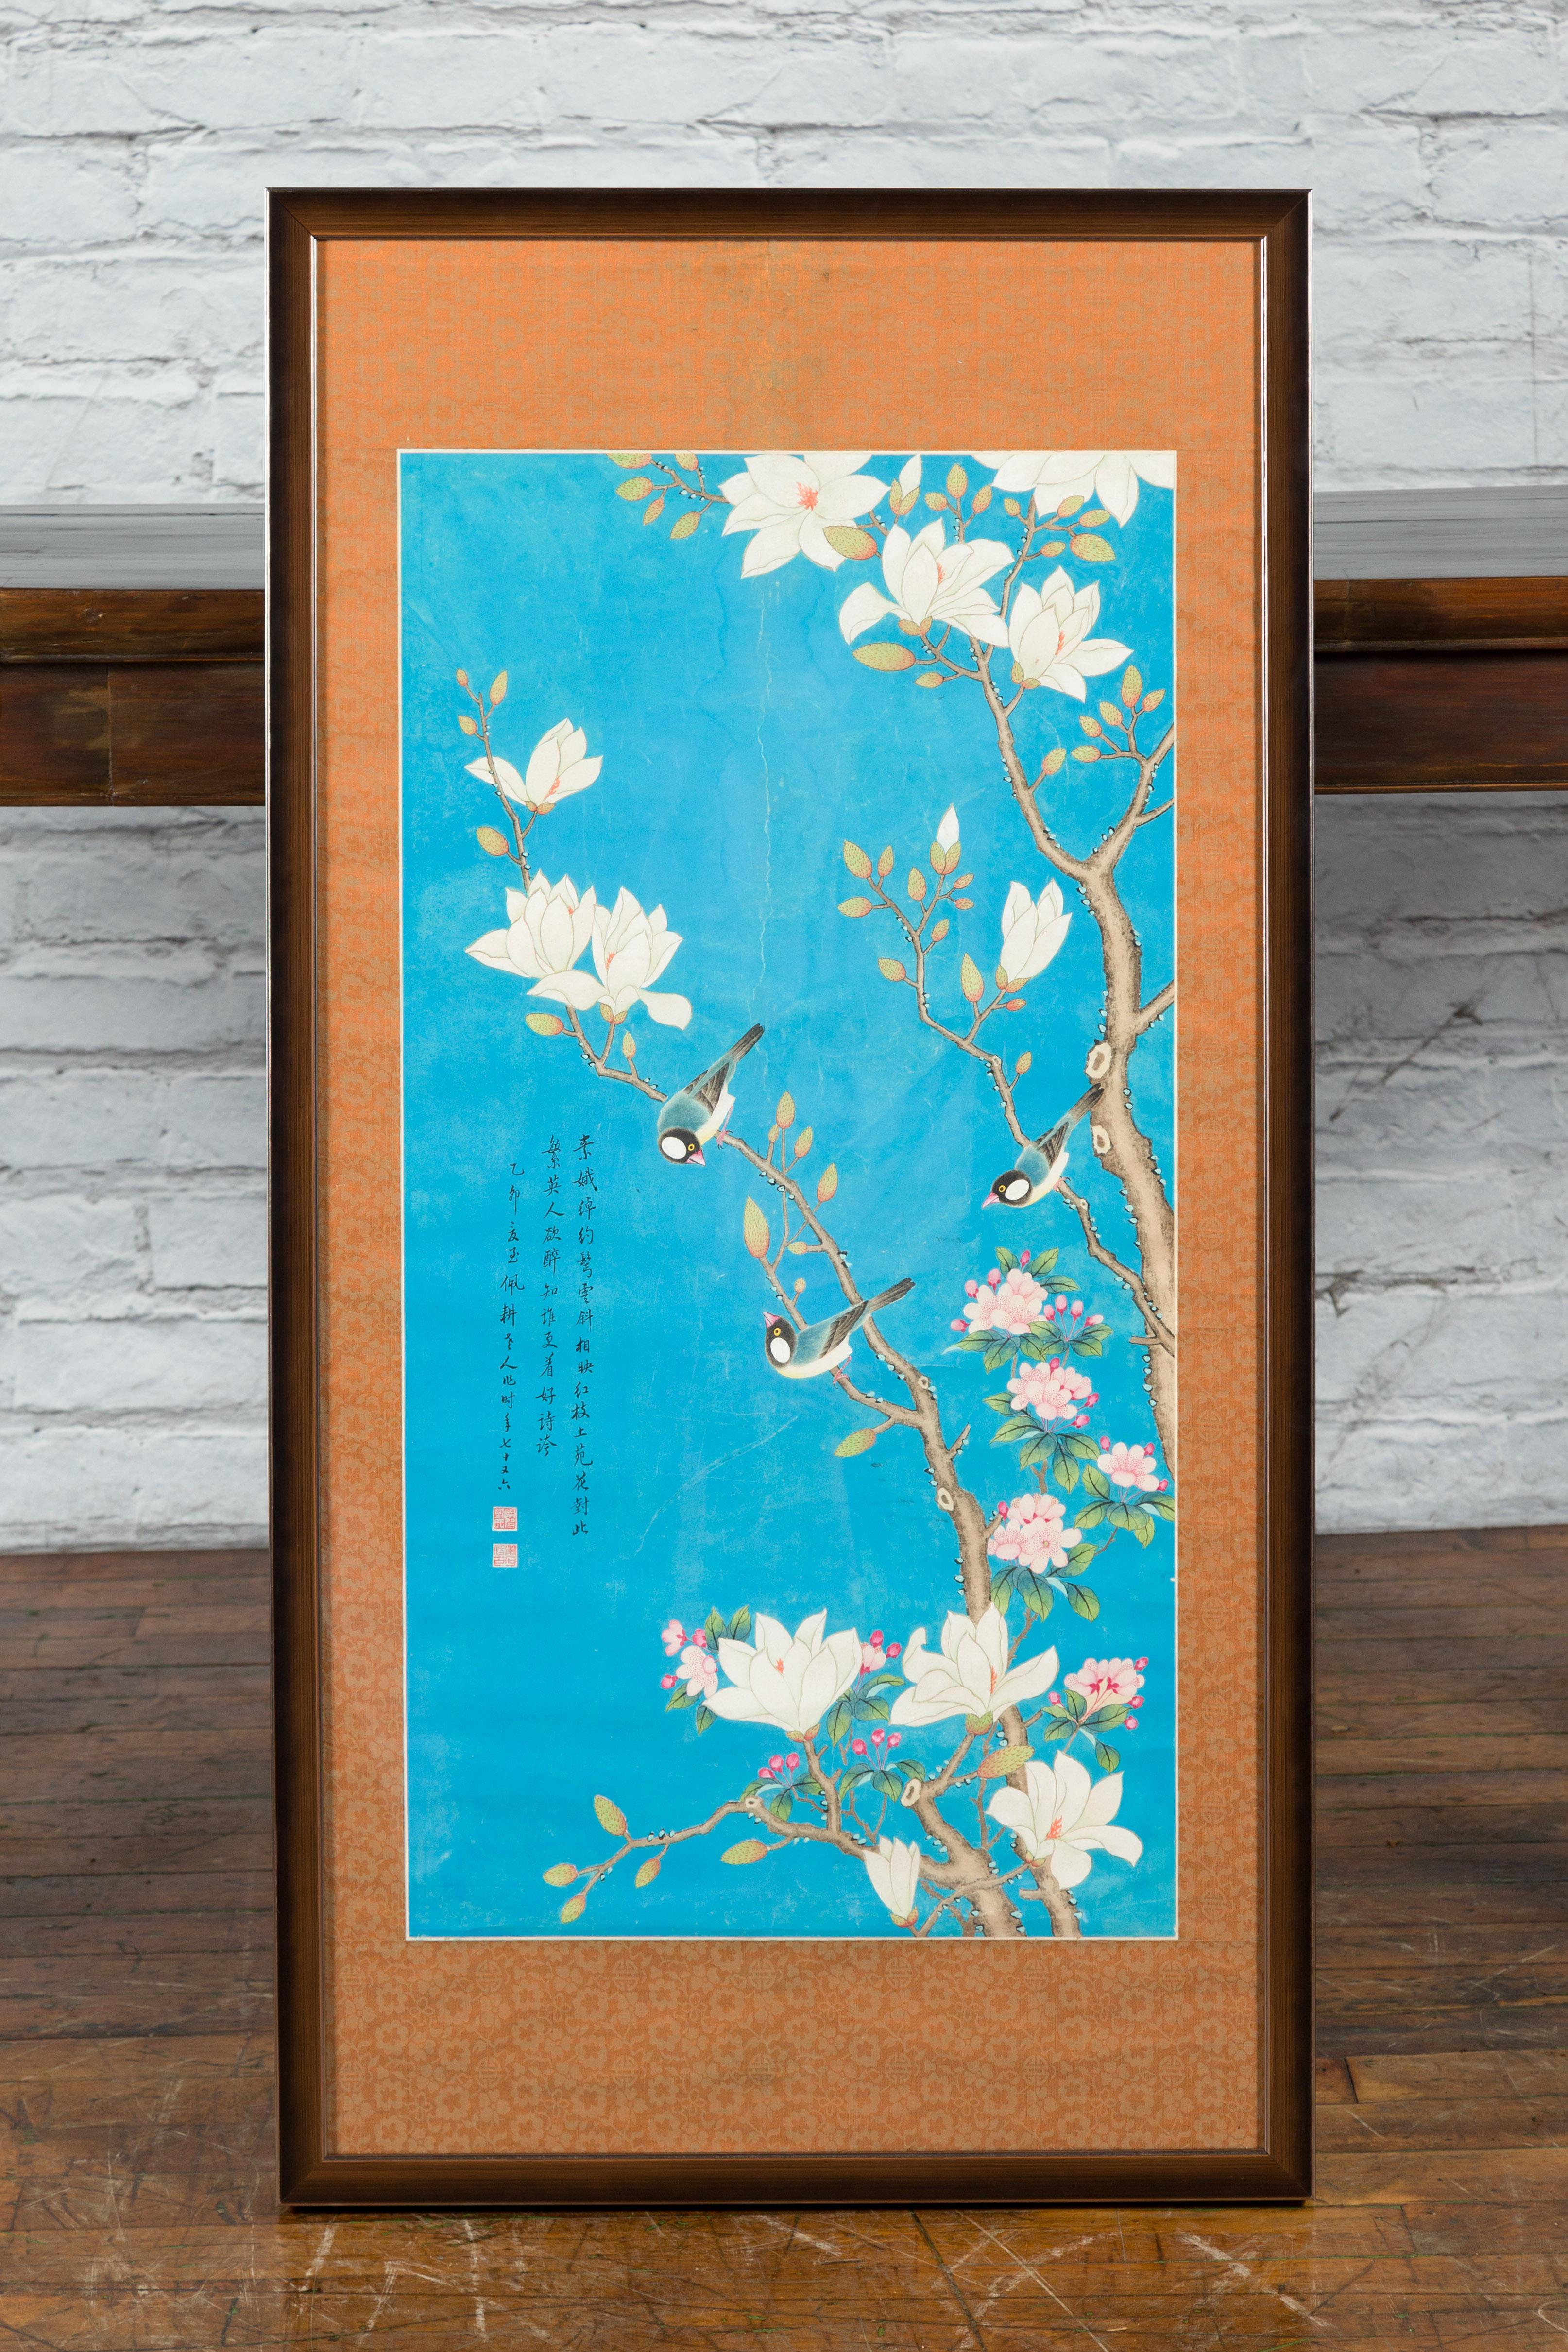 Chinese Qing Dynasty 19th Century Turquoise Print Depicting Birds Perched in a Tree For Sale